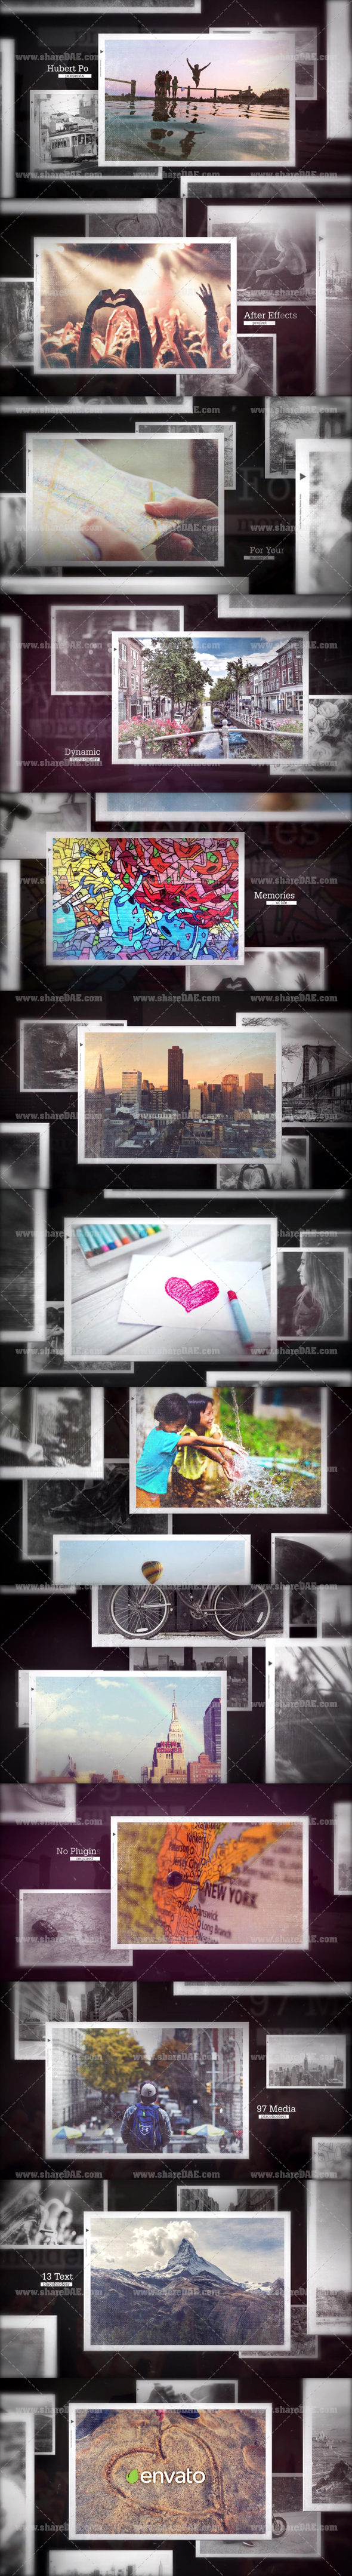 Videohive - Dynamic Photo Gallery 20011606 - Free Download 